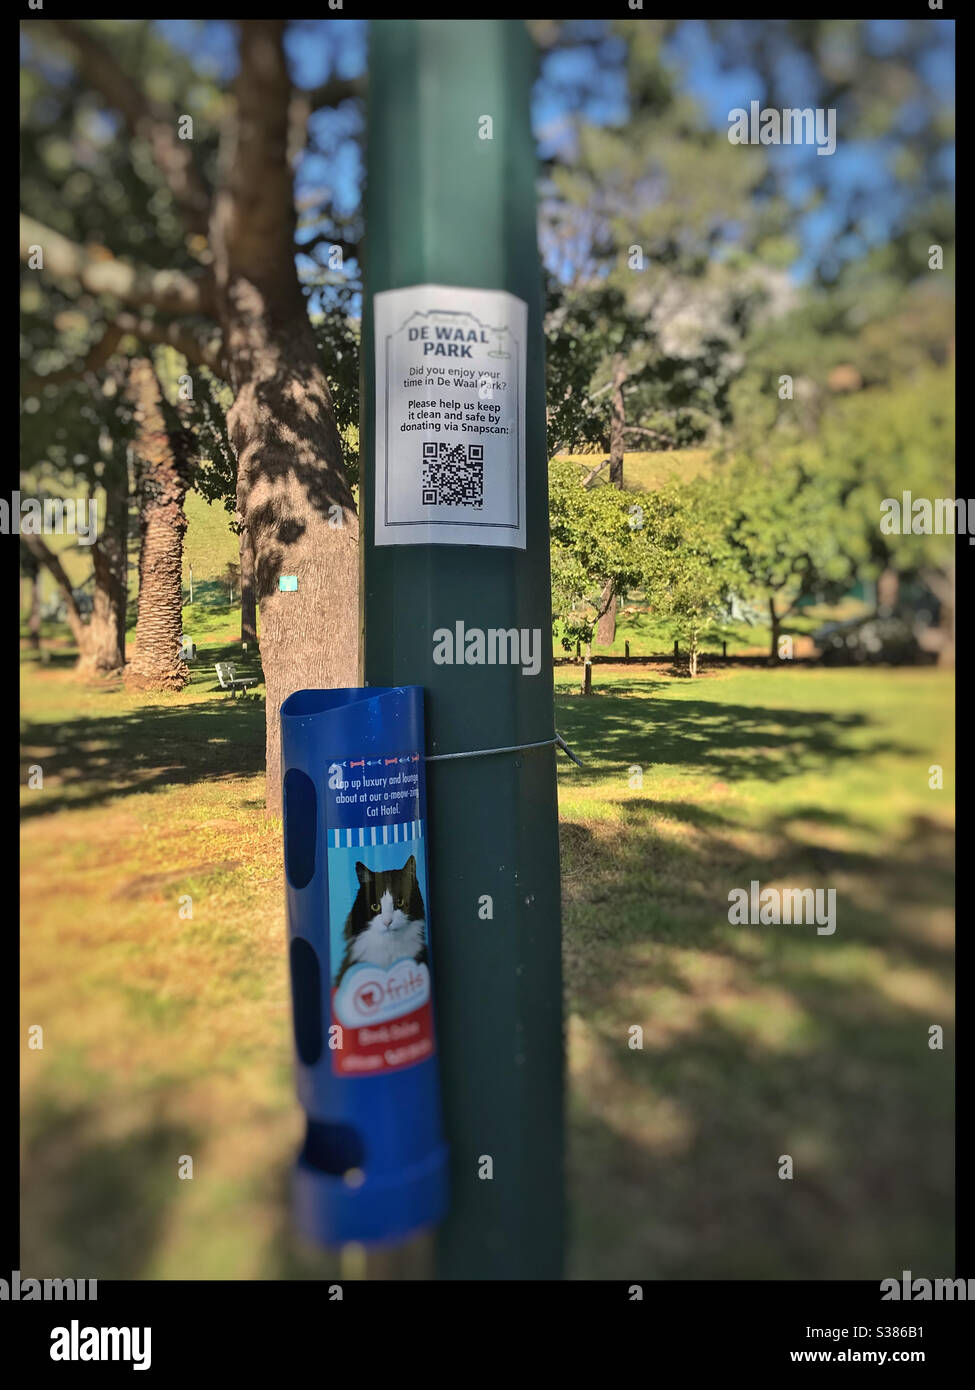 Dog poo bag dispenser in De Waal park, Cape Town, South Africa. Stock Photo